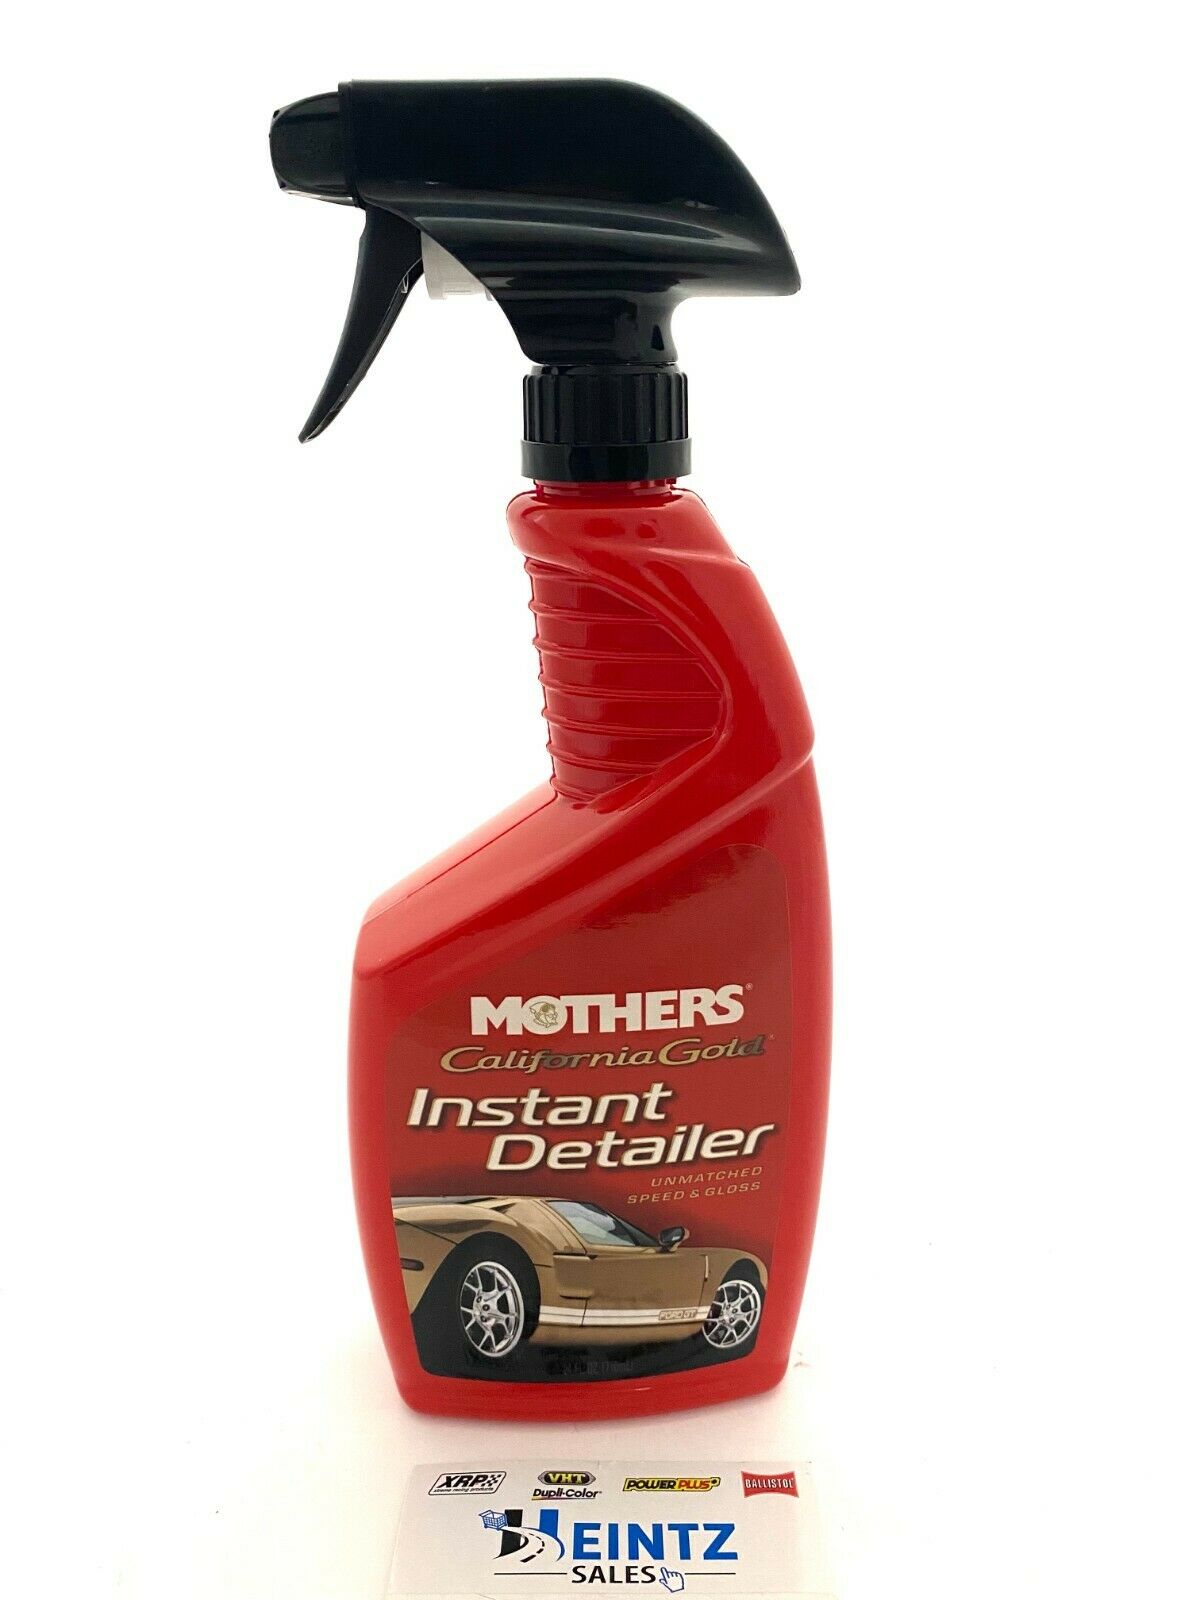 MOTHERS 08224 California Gold Instant Detailer Showtime - Unmatched Gloss - 24 oz.